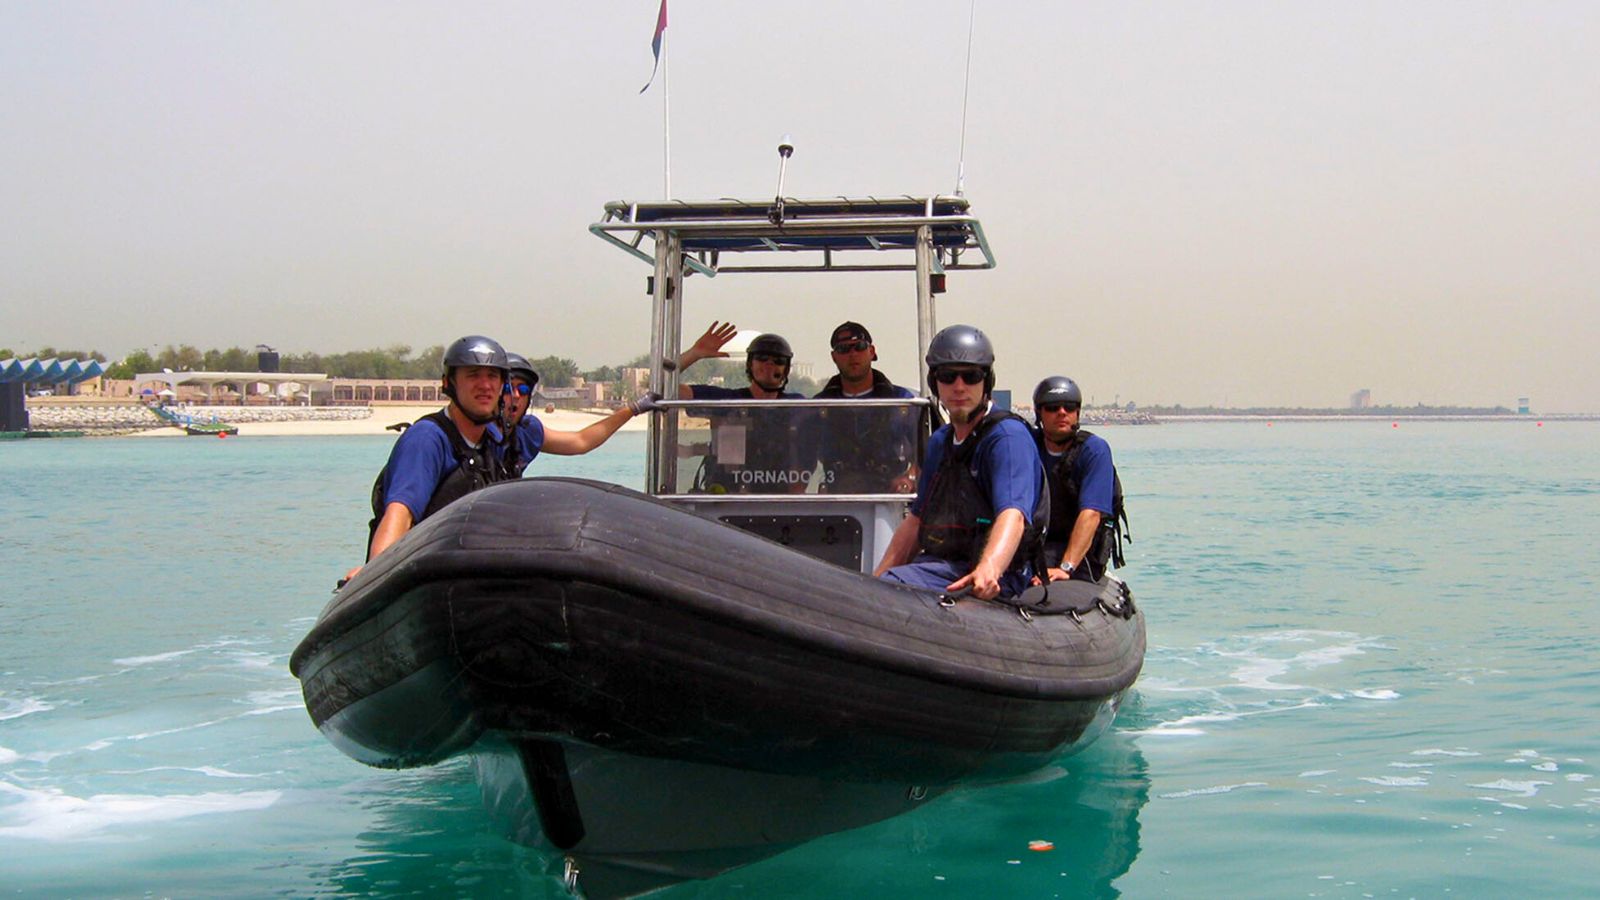 Tornado-boats-for-military-police-rescue-and-offshore-purposes